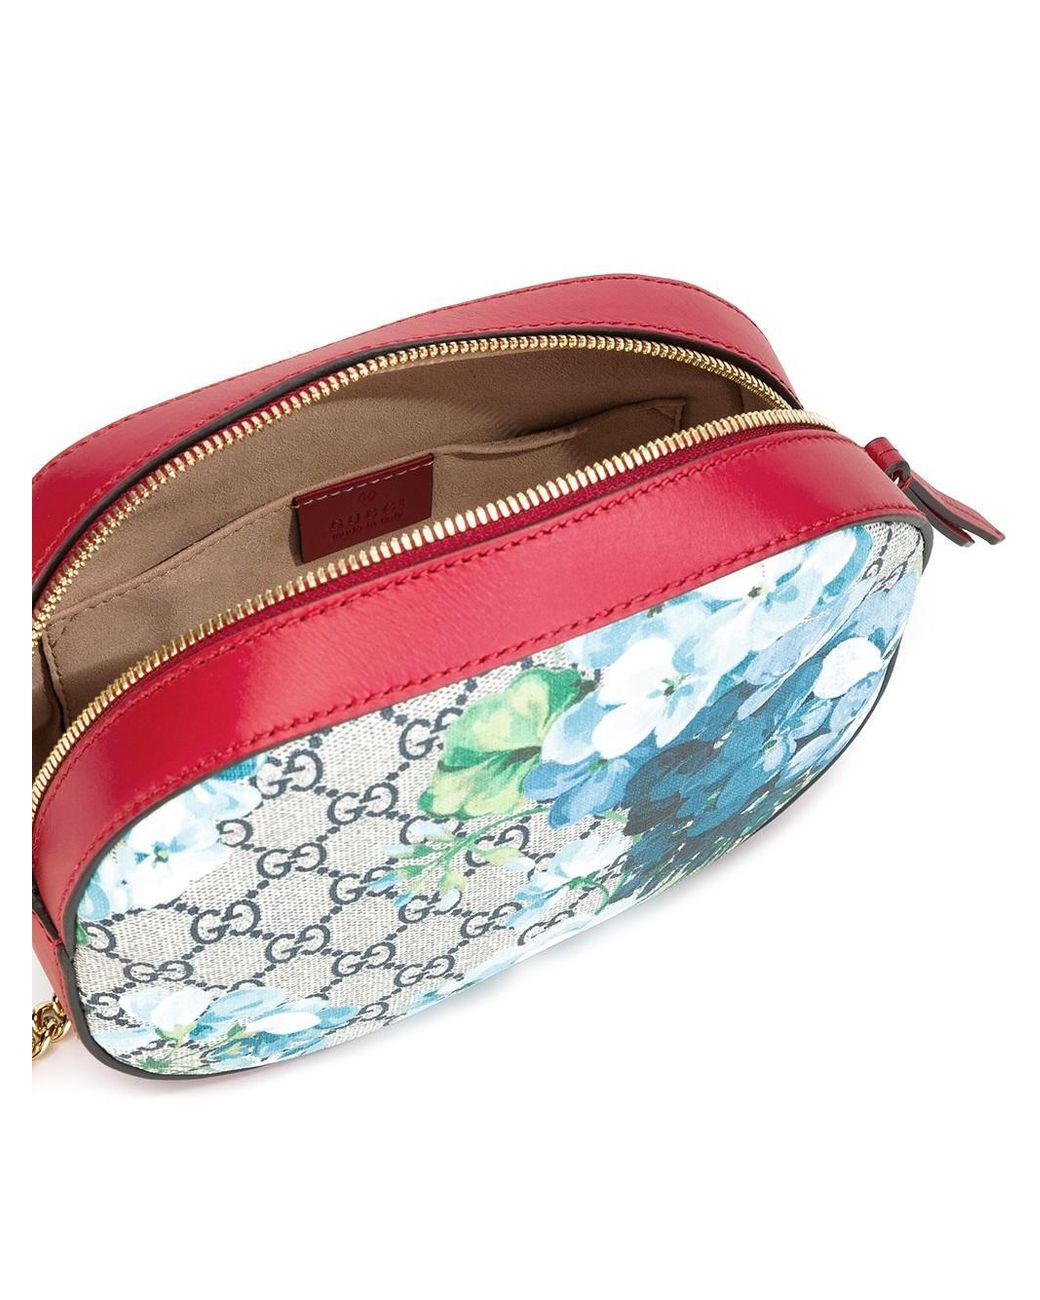 Gucci Floral Print Crossbody Bag in Red | Lyst